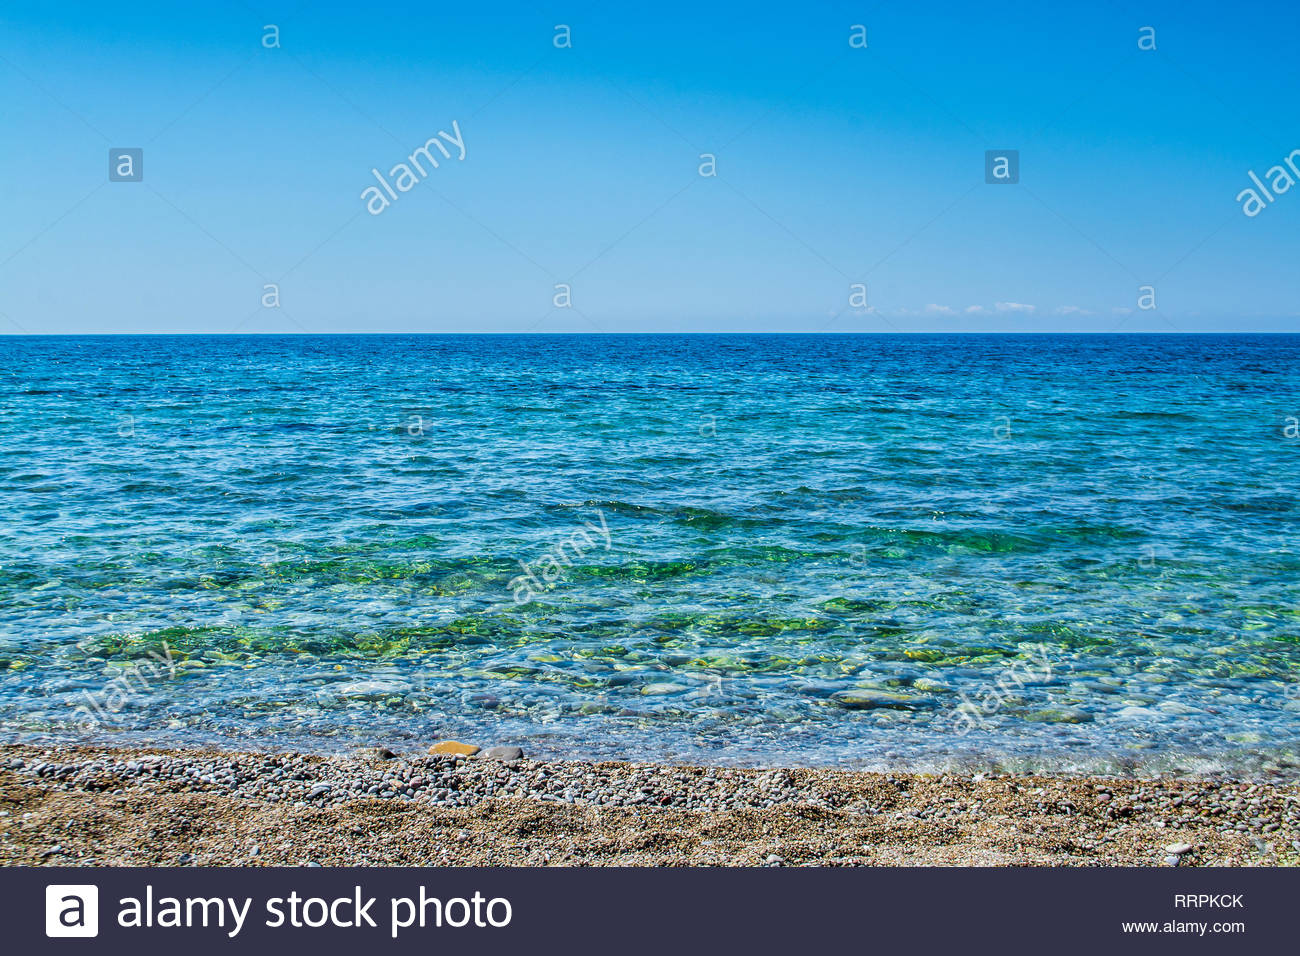 Calm Sea Or Ocean With Beach And Shallow Water Summer Coastline